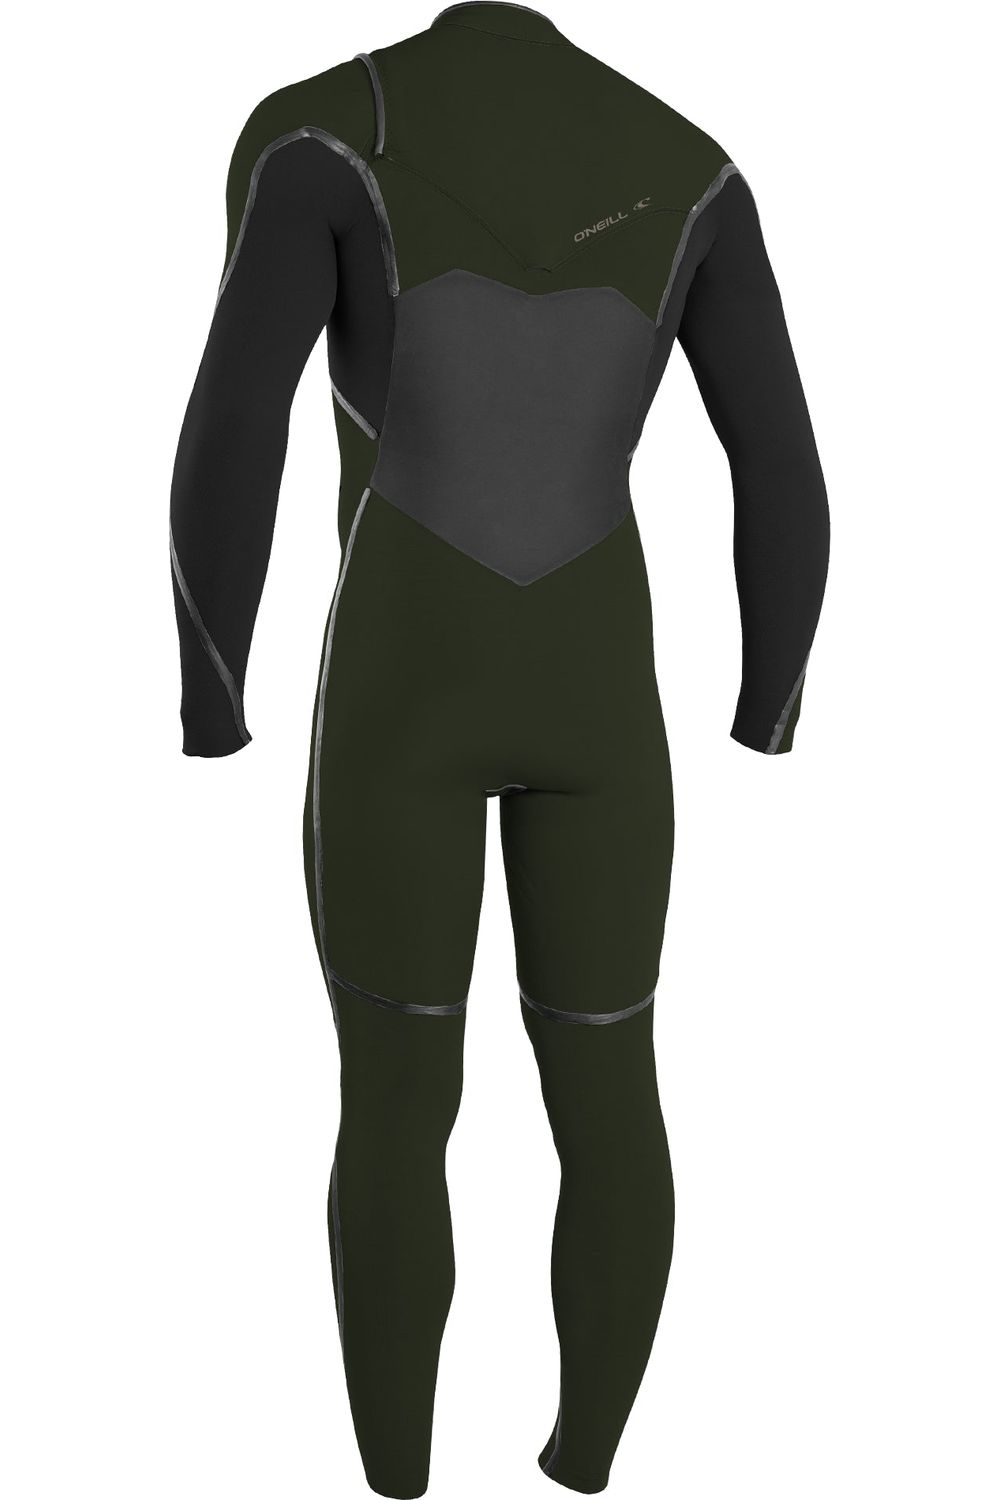 O'Neill Psycho Tech 5/4 Chest Zip Wetsuit In Full Ghost Green & Black